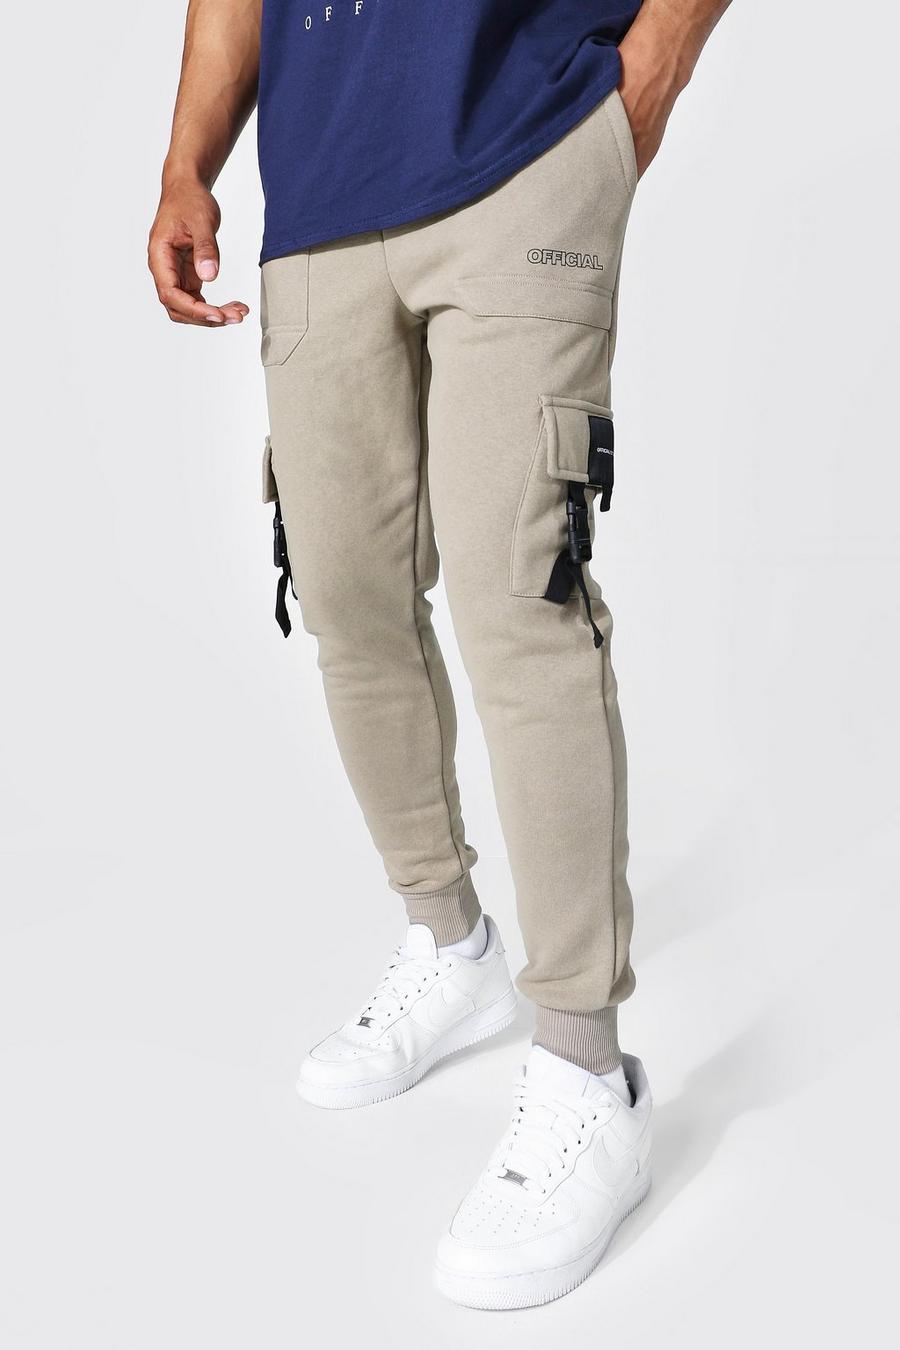 Sage Official Utility Skinny Cargo Joggers image number 1